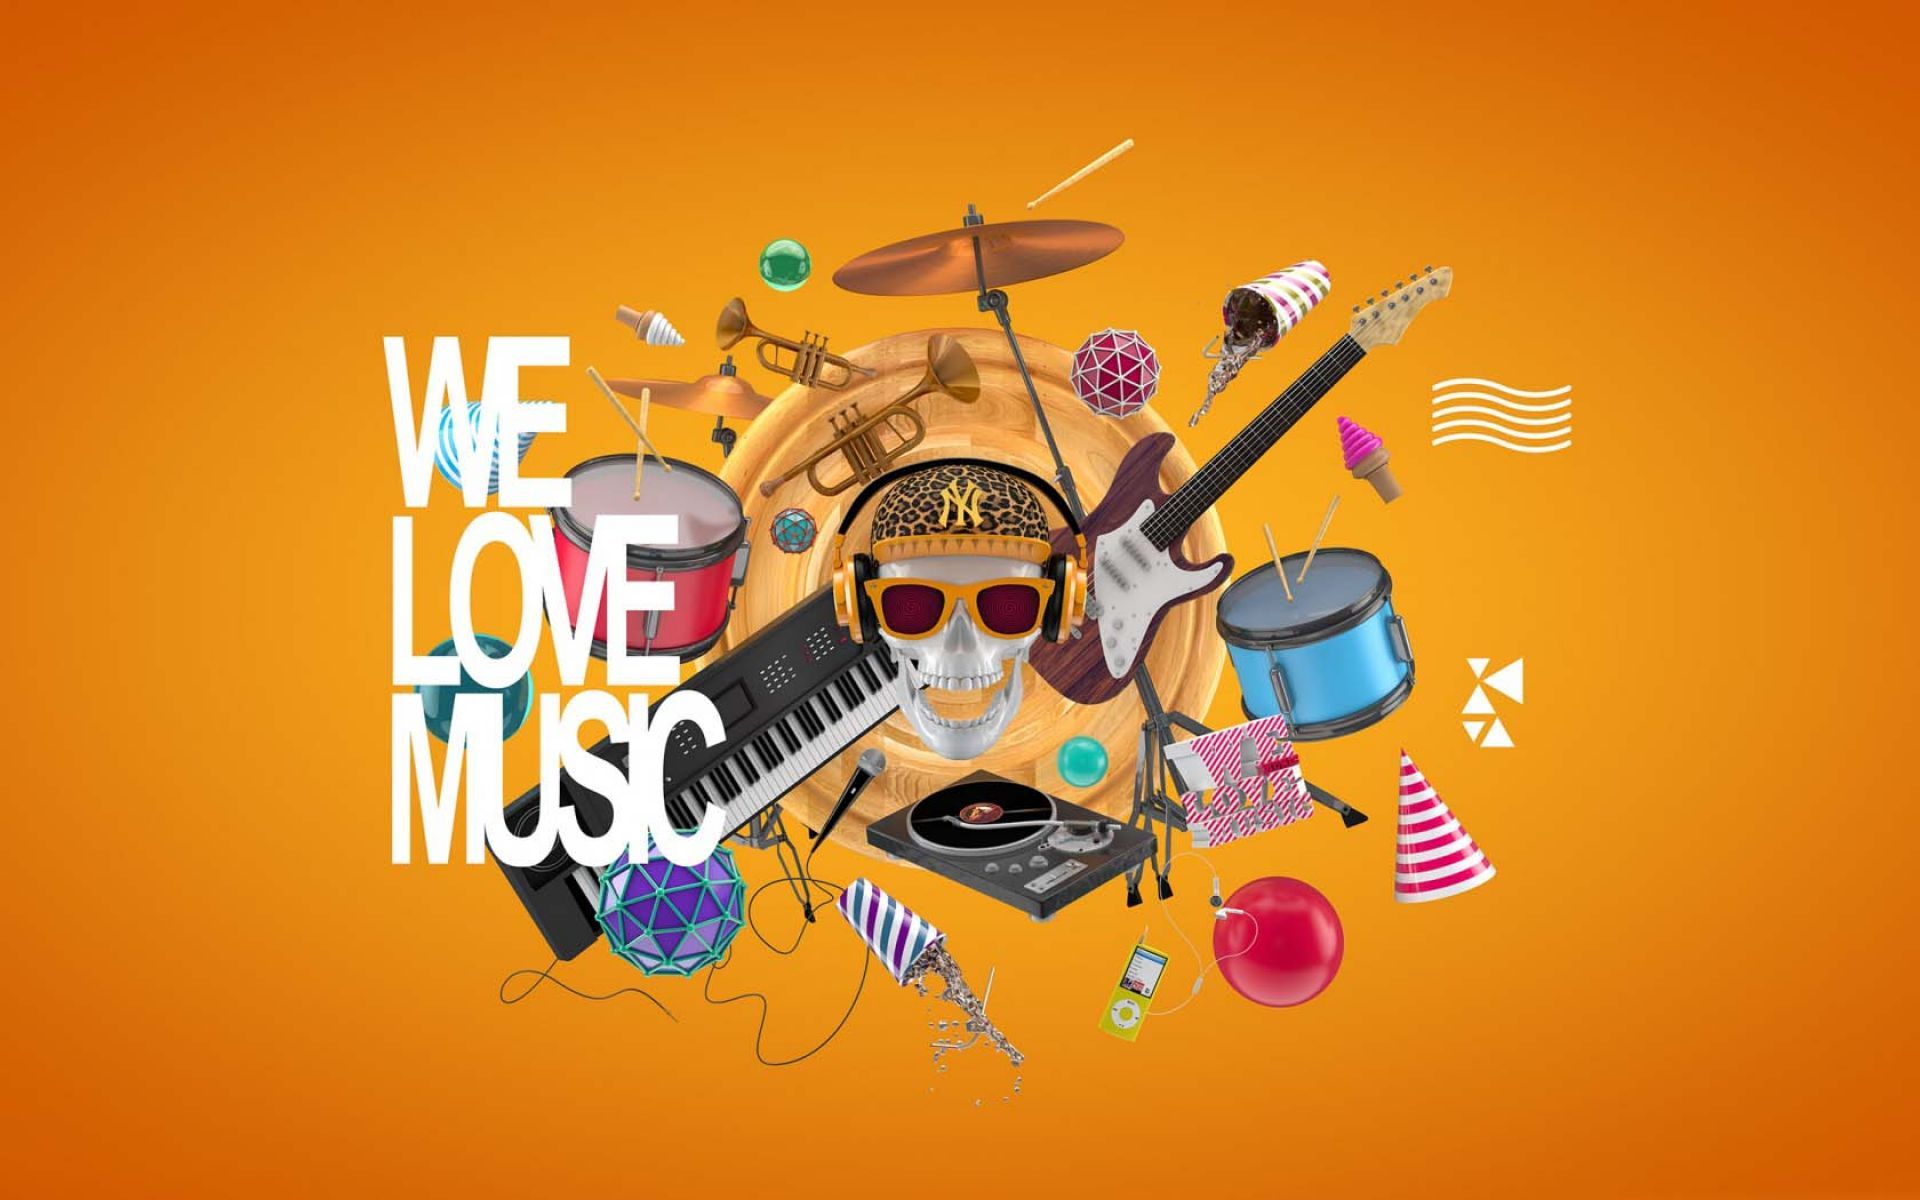 we love music wallpaper. HD Dance and Music Wallpaper for Mobile